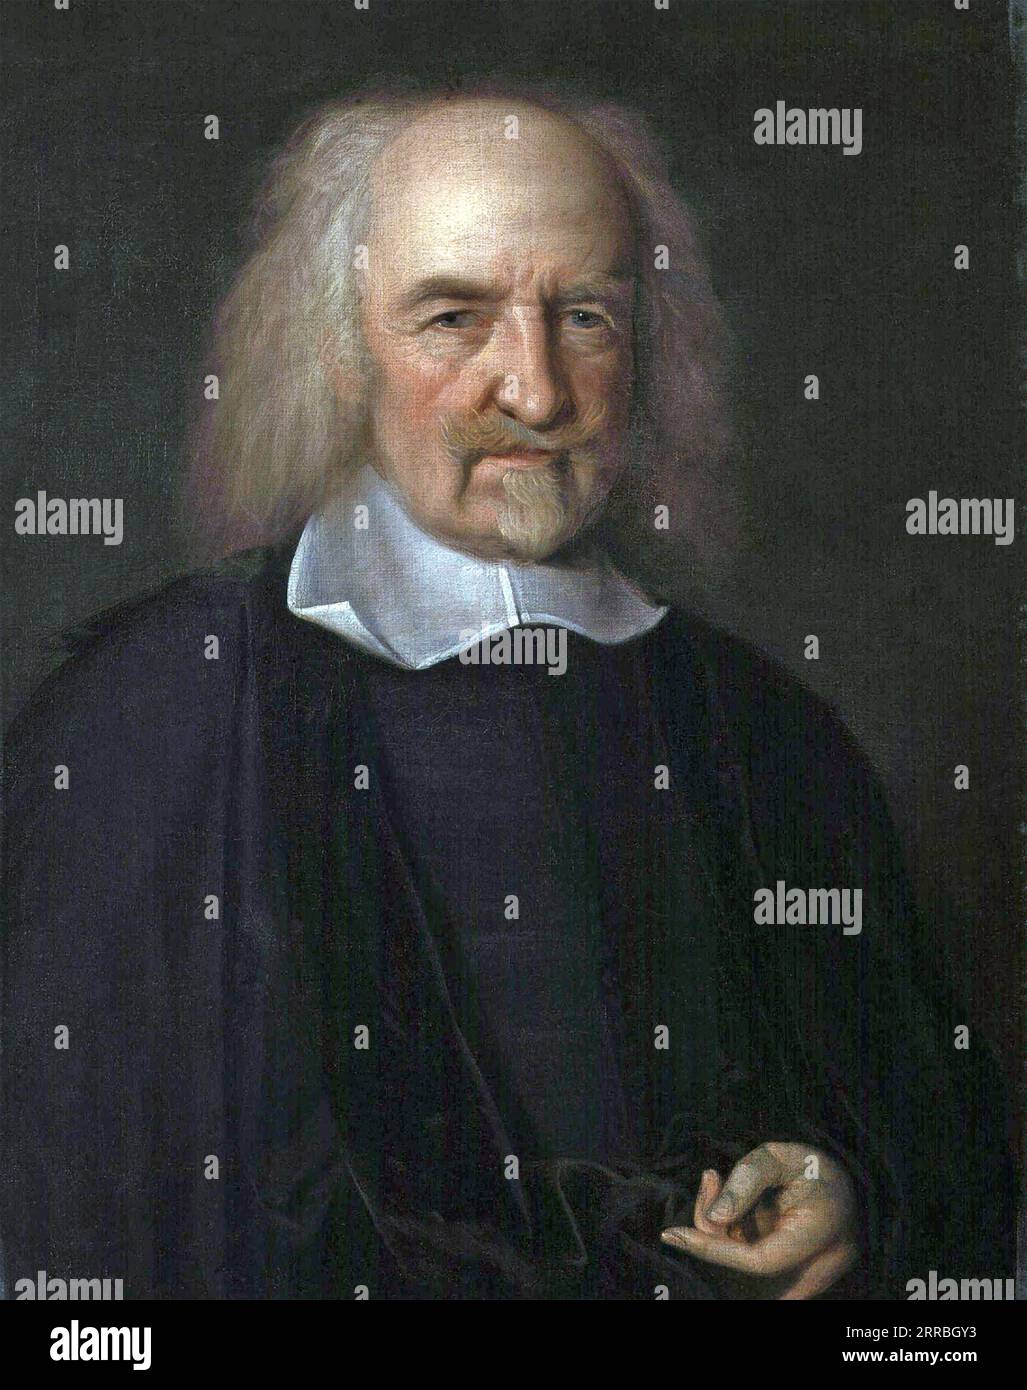 THOMAS HOBBES (1588-1679) philosophe anglais, vers 1670. Banque D'Images